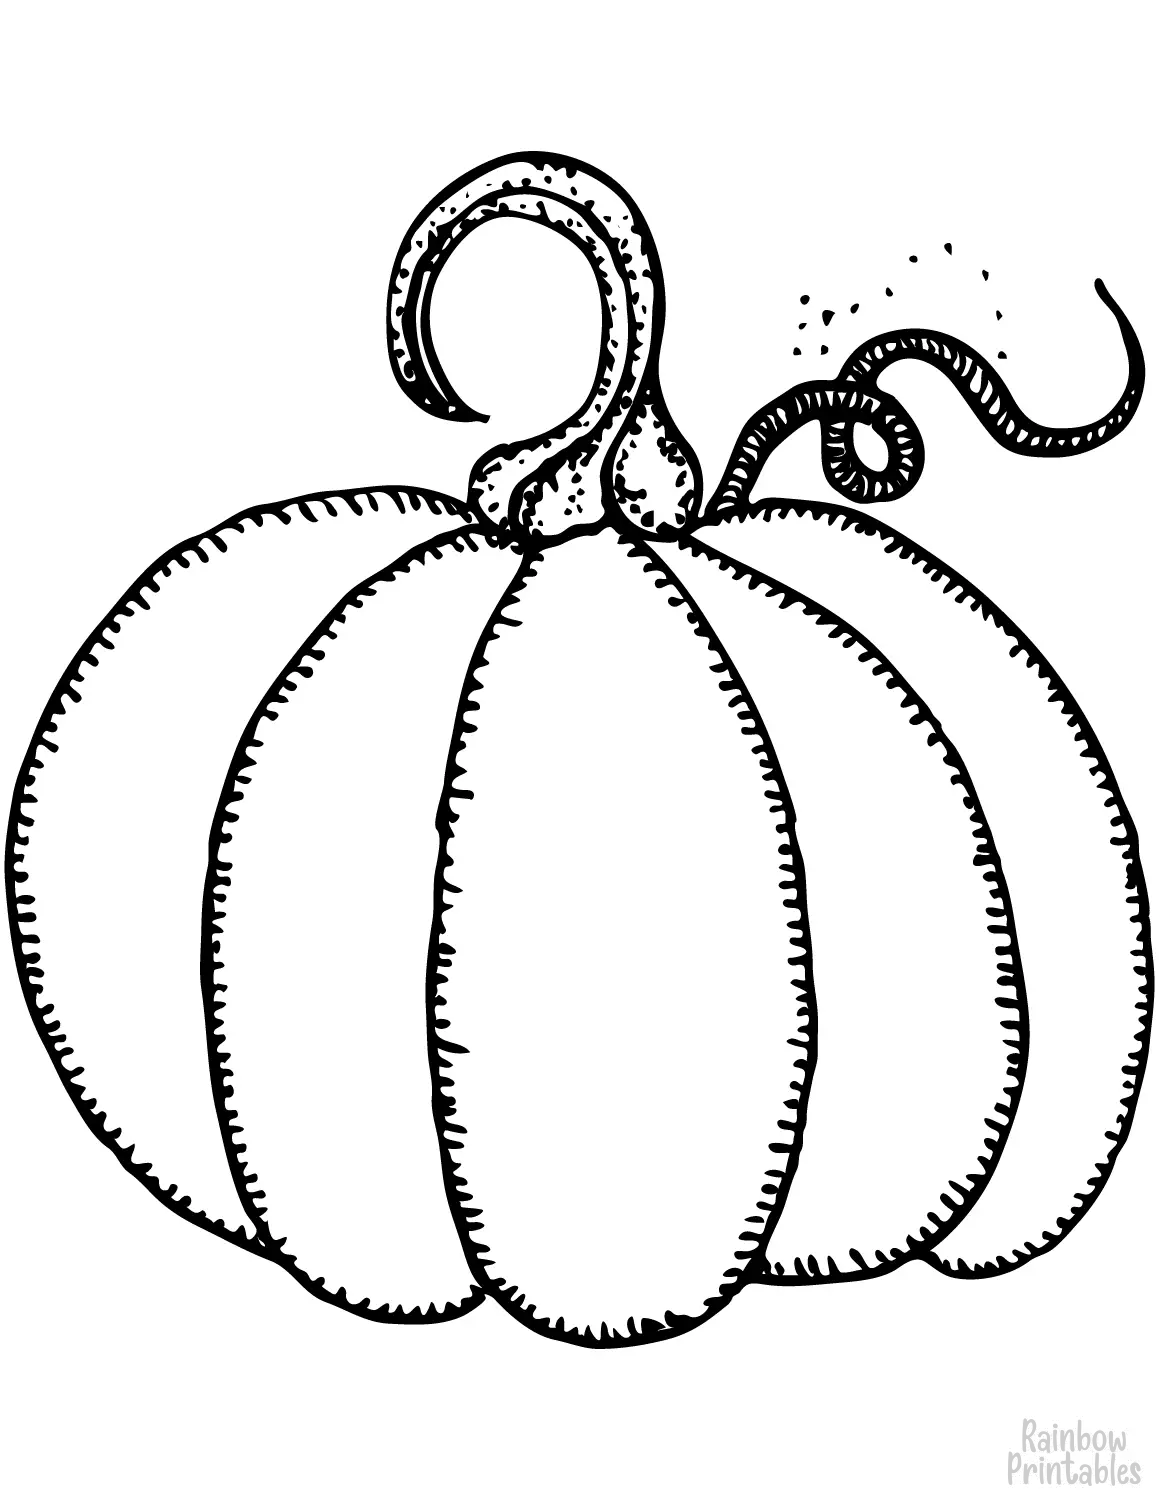 MAGIC Pumpkin Halloween Line Art Drawing Set Free Activity Coloring Pages for Kids-02